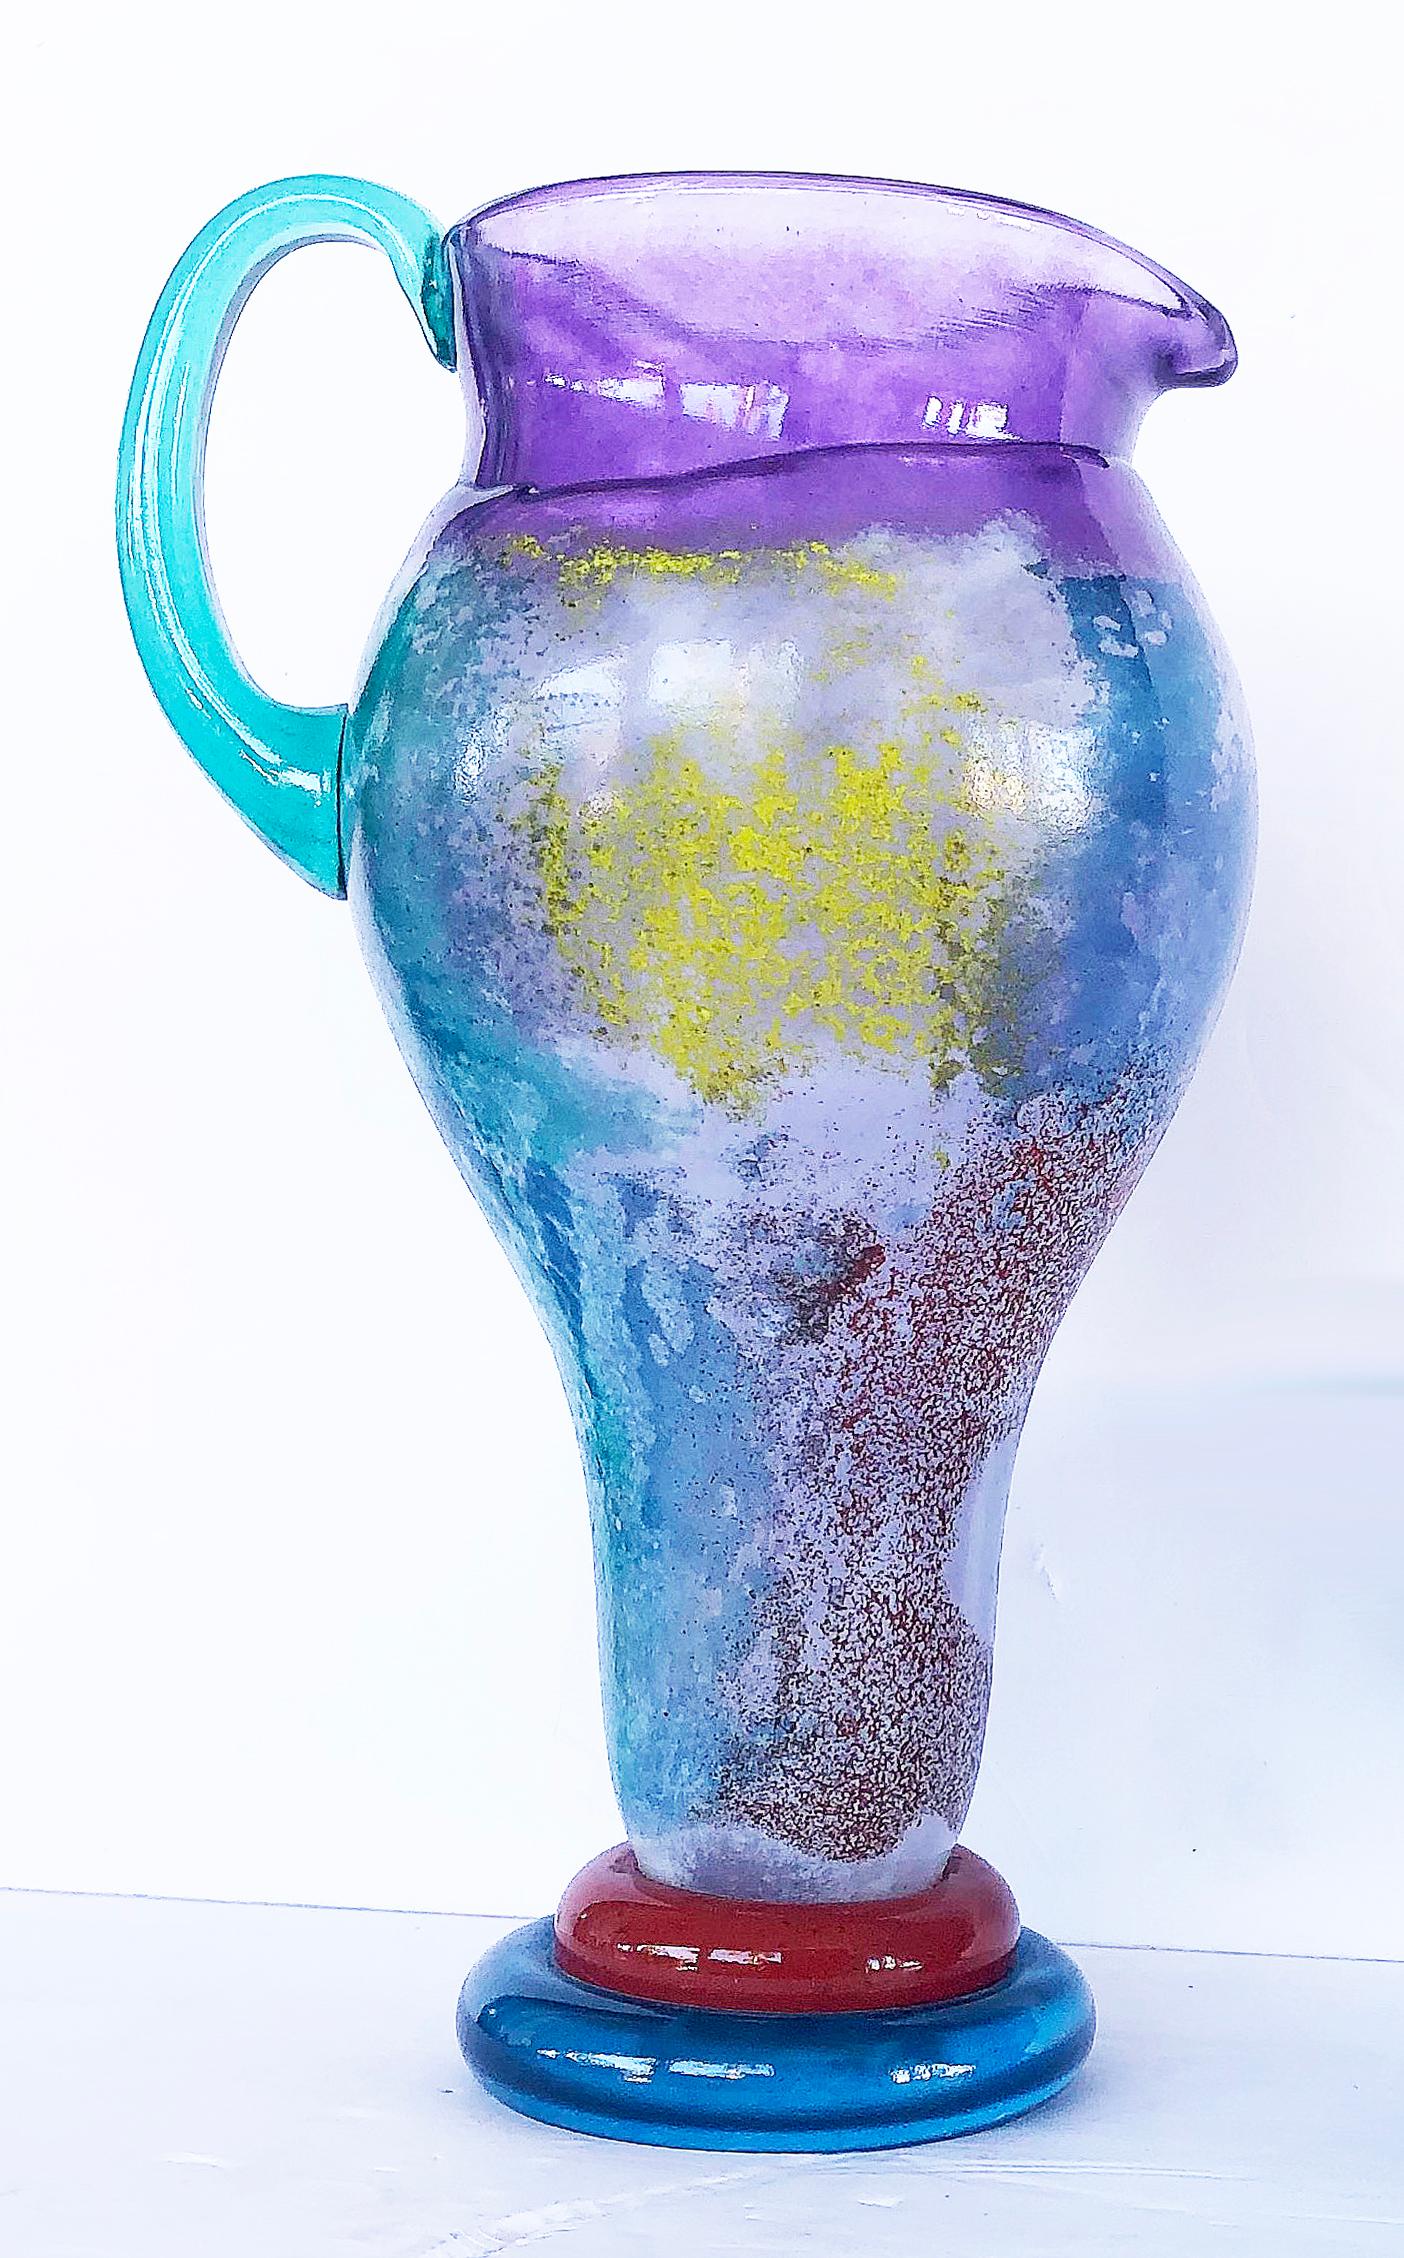 Vintage Kosta Boda art glass pitcher by Kjell Engman

 Offered for sale is a blown art glass Kosta Boda pitcher by Kjell Engman. The pitcher is uniquely colored and is signed while retaining the original label on the base. 

The pitcher measures